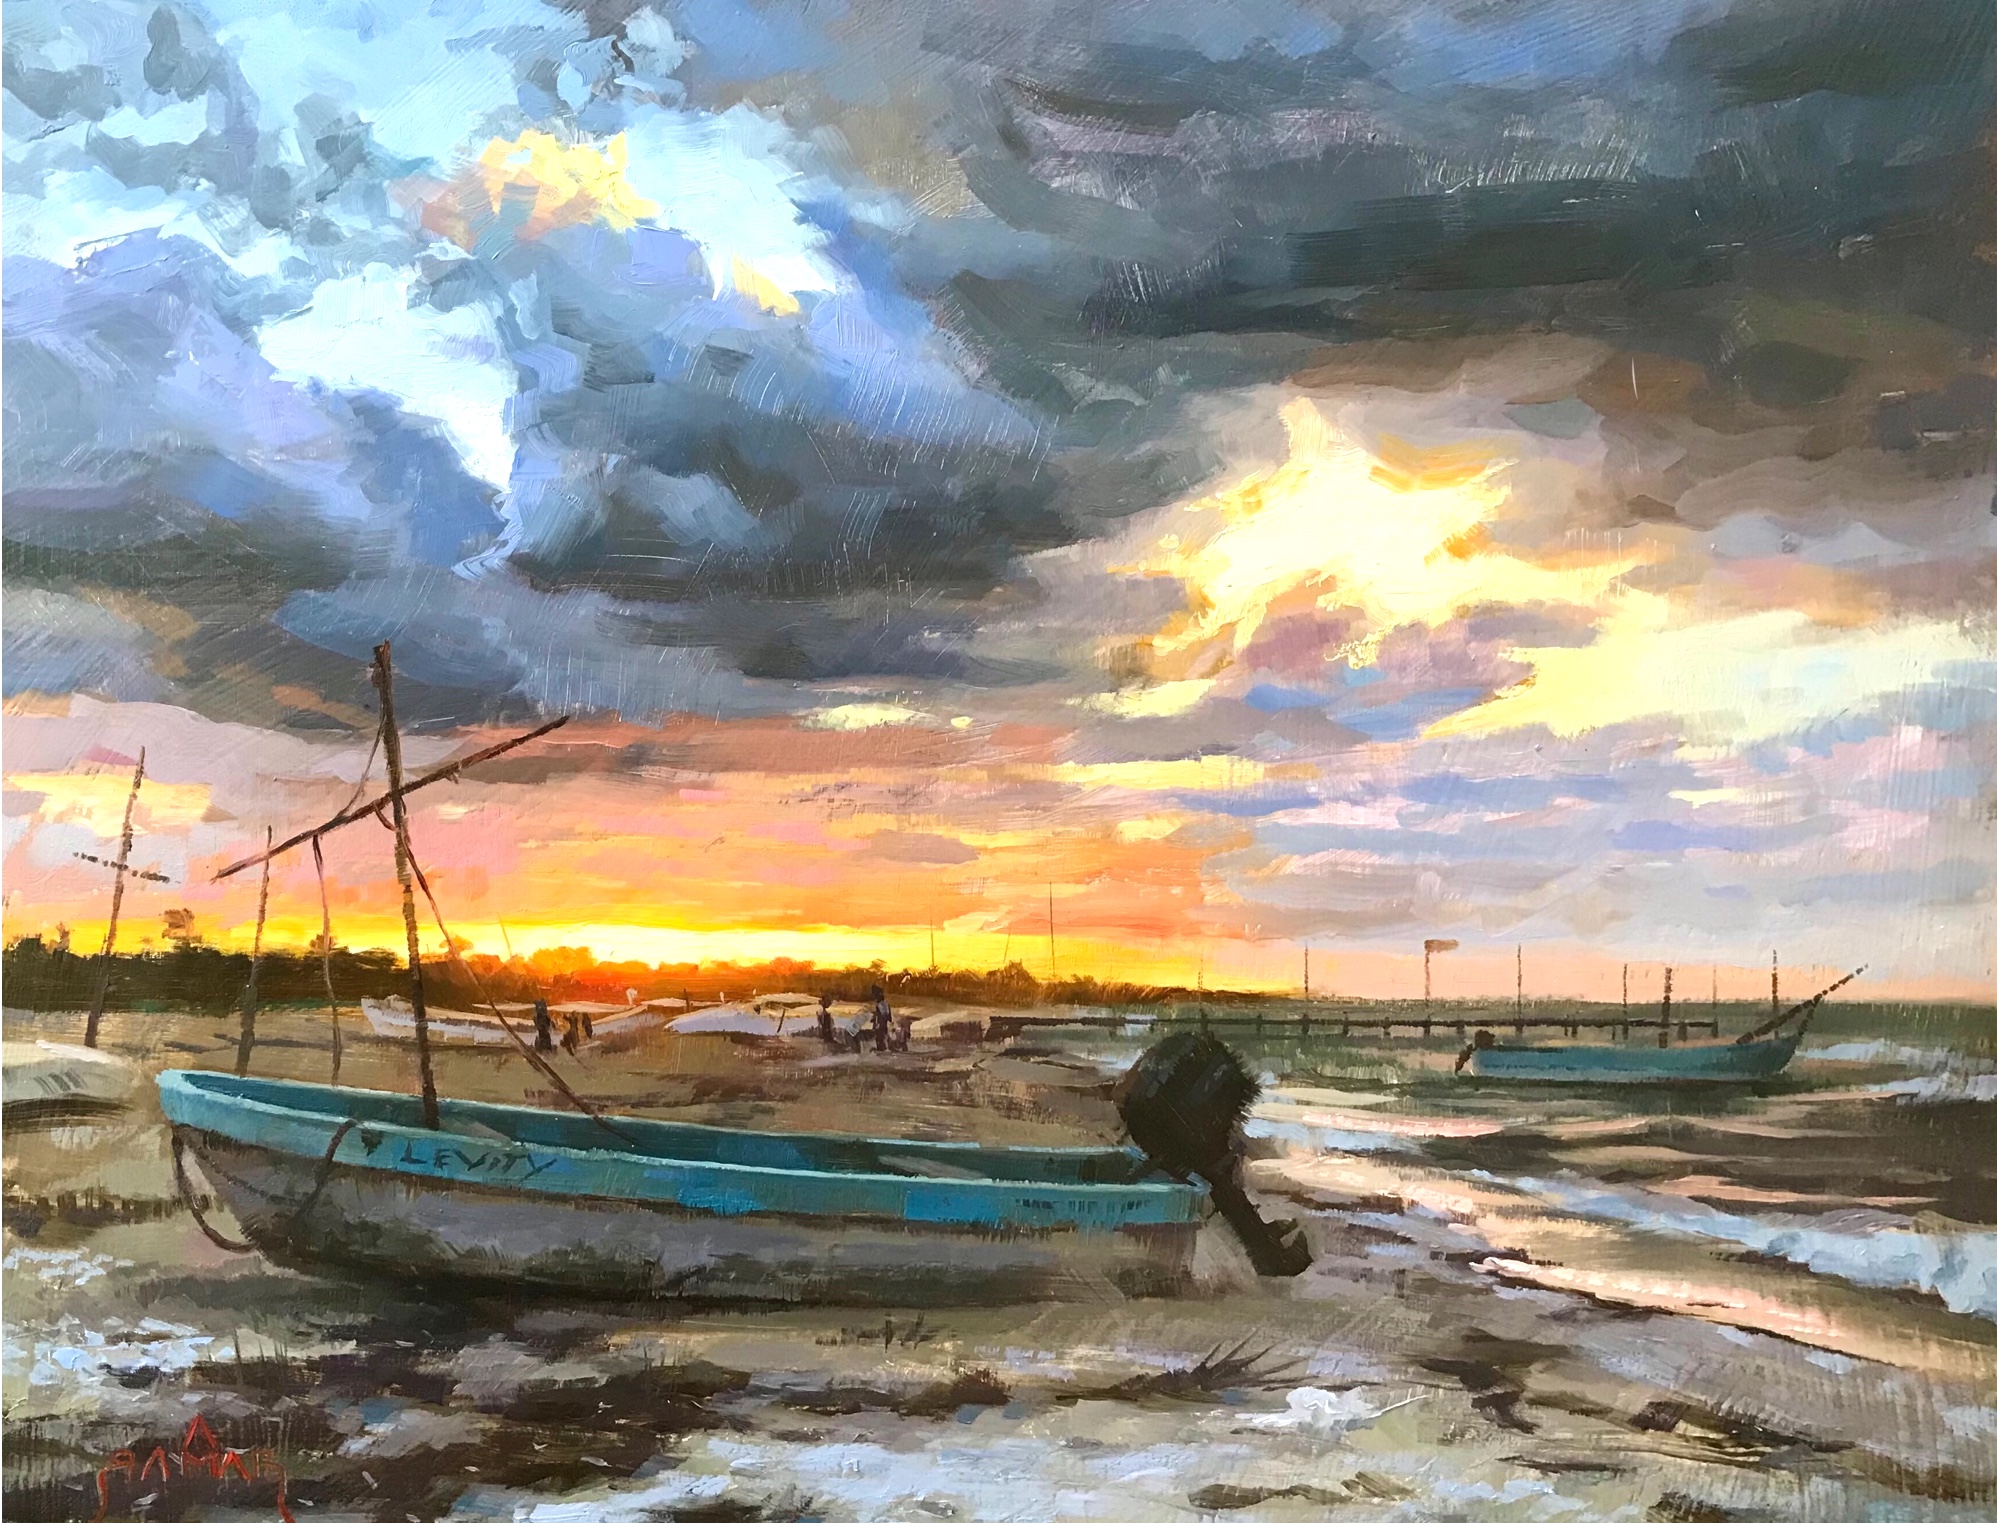 Antwan Ramar, “Shore Thing,” 2022, oil, 14 x 18 in., Available from Cocco & Salem Gallery, Key West, FL, Studio from plein air study